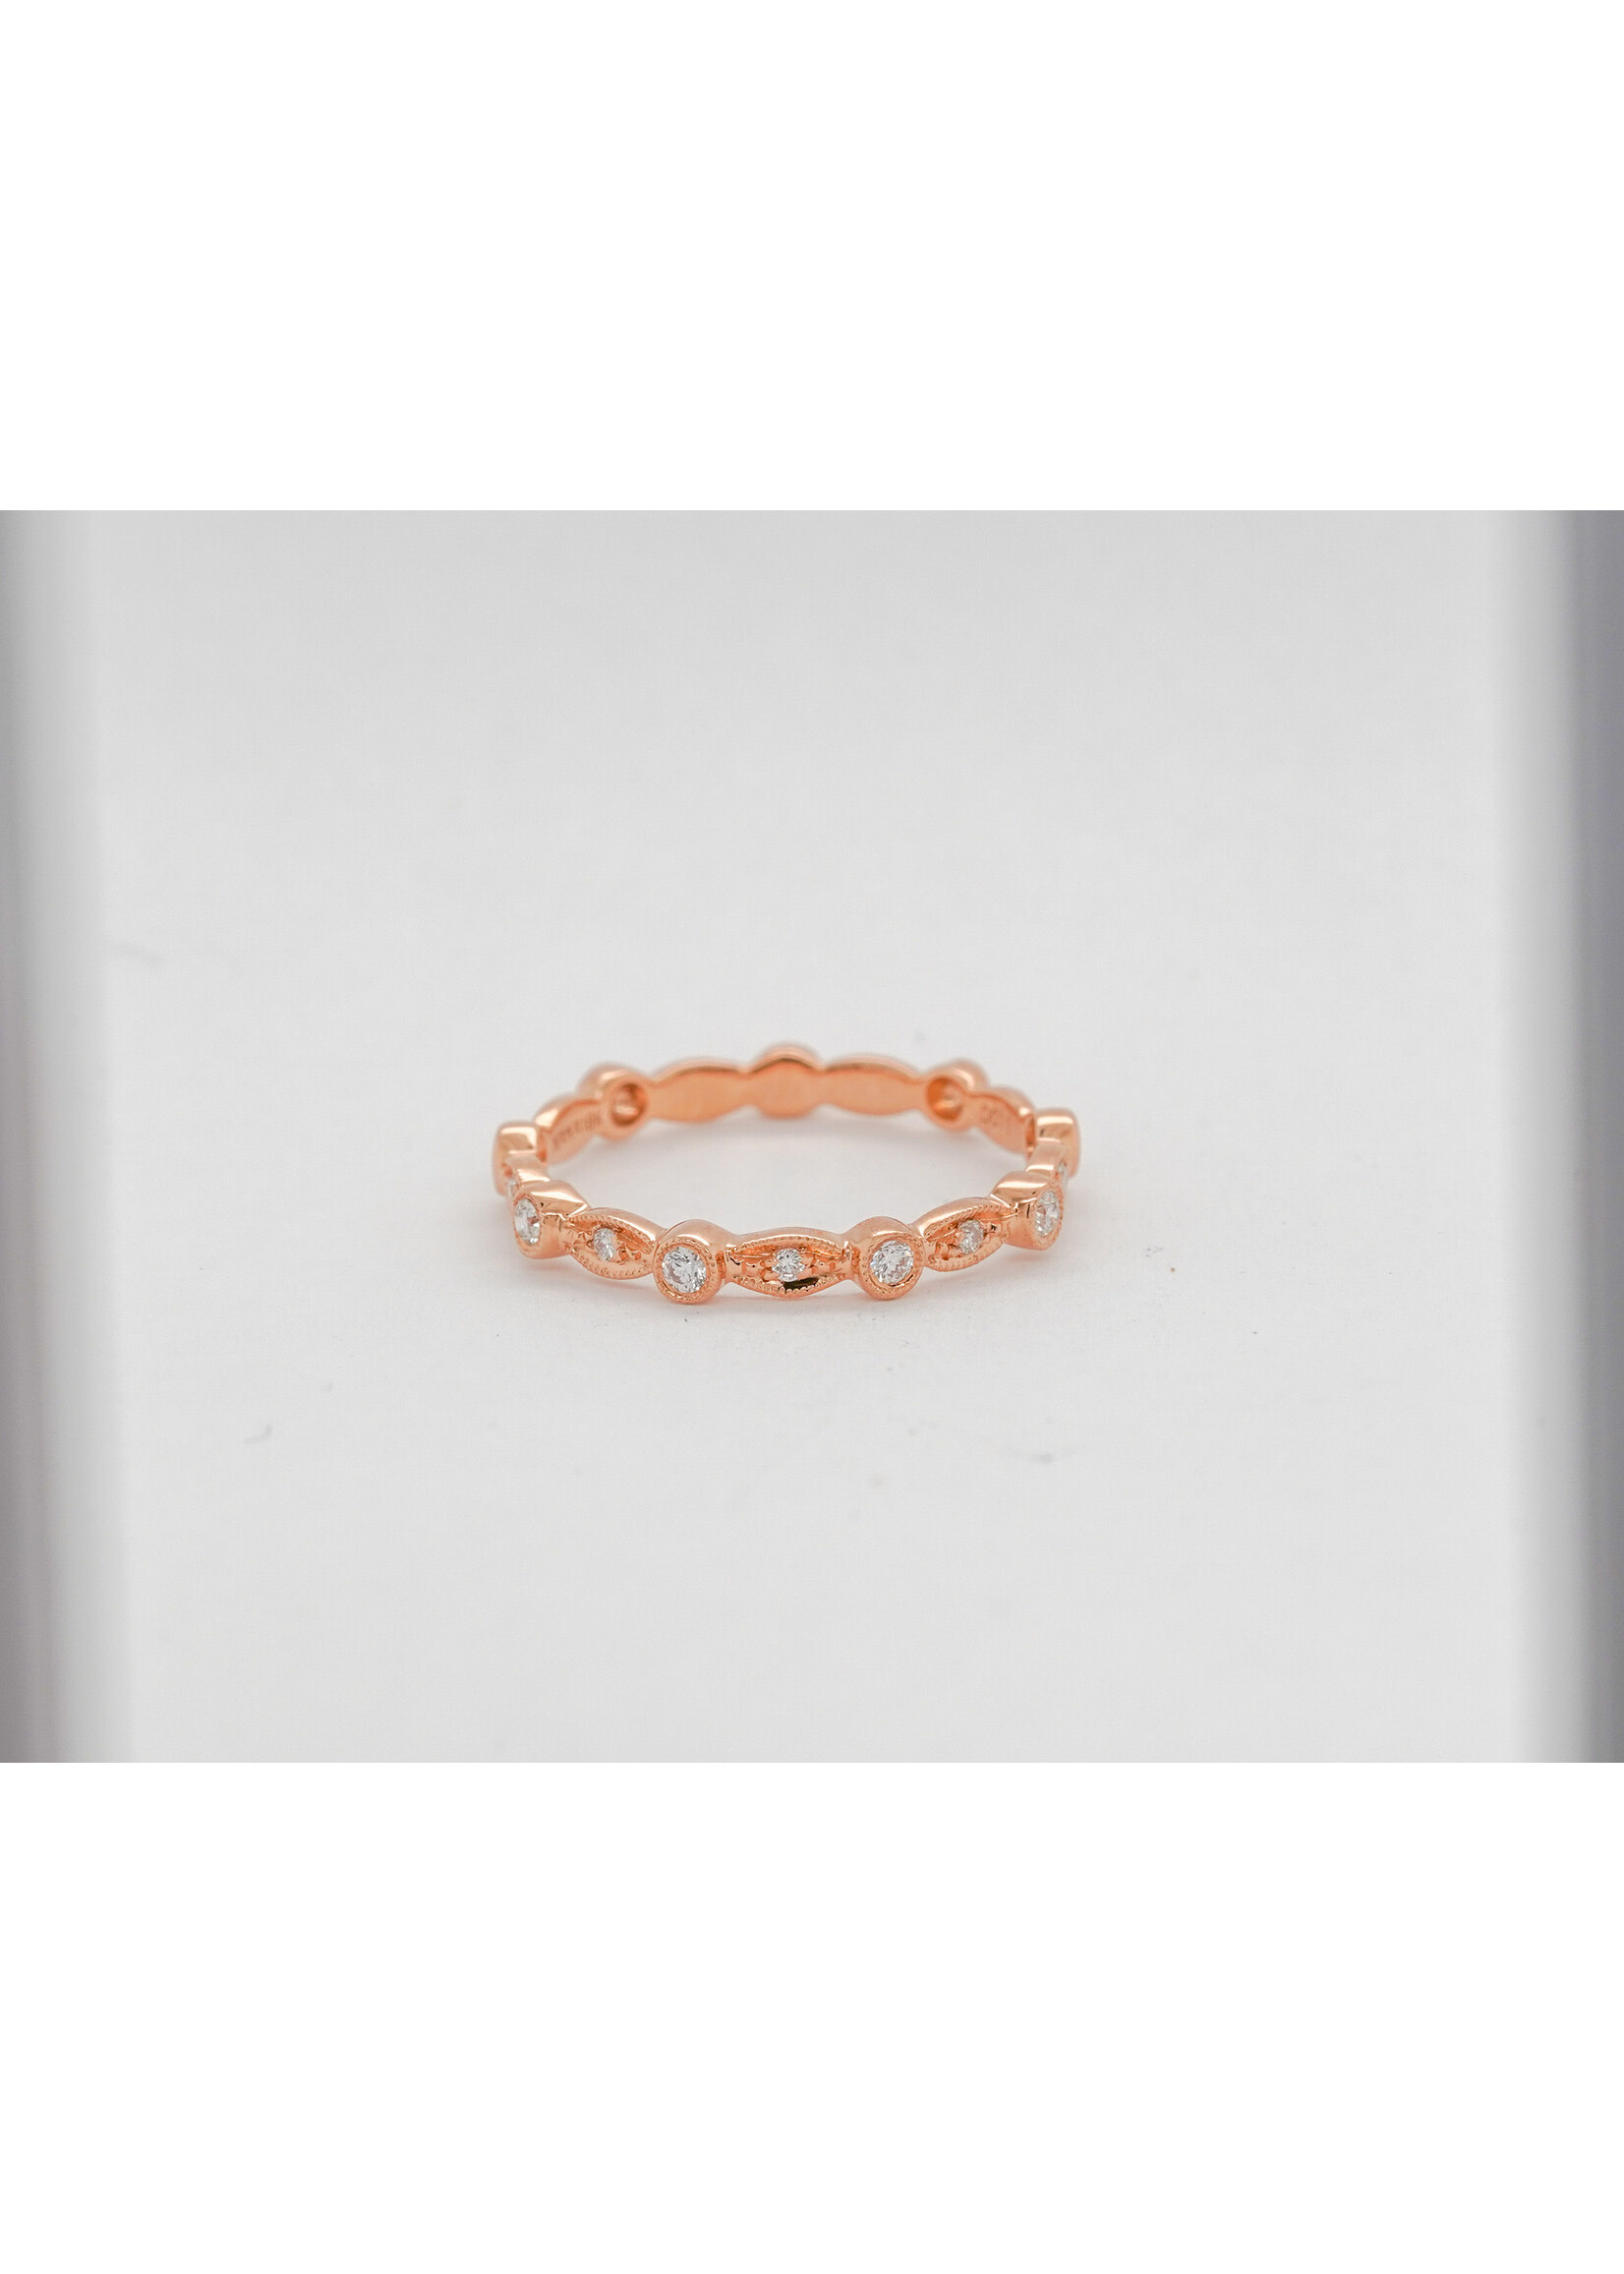 18KR 1.89g .11ctw Diamond Stackable Band (size 6.5)